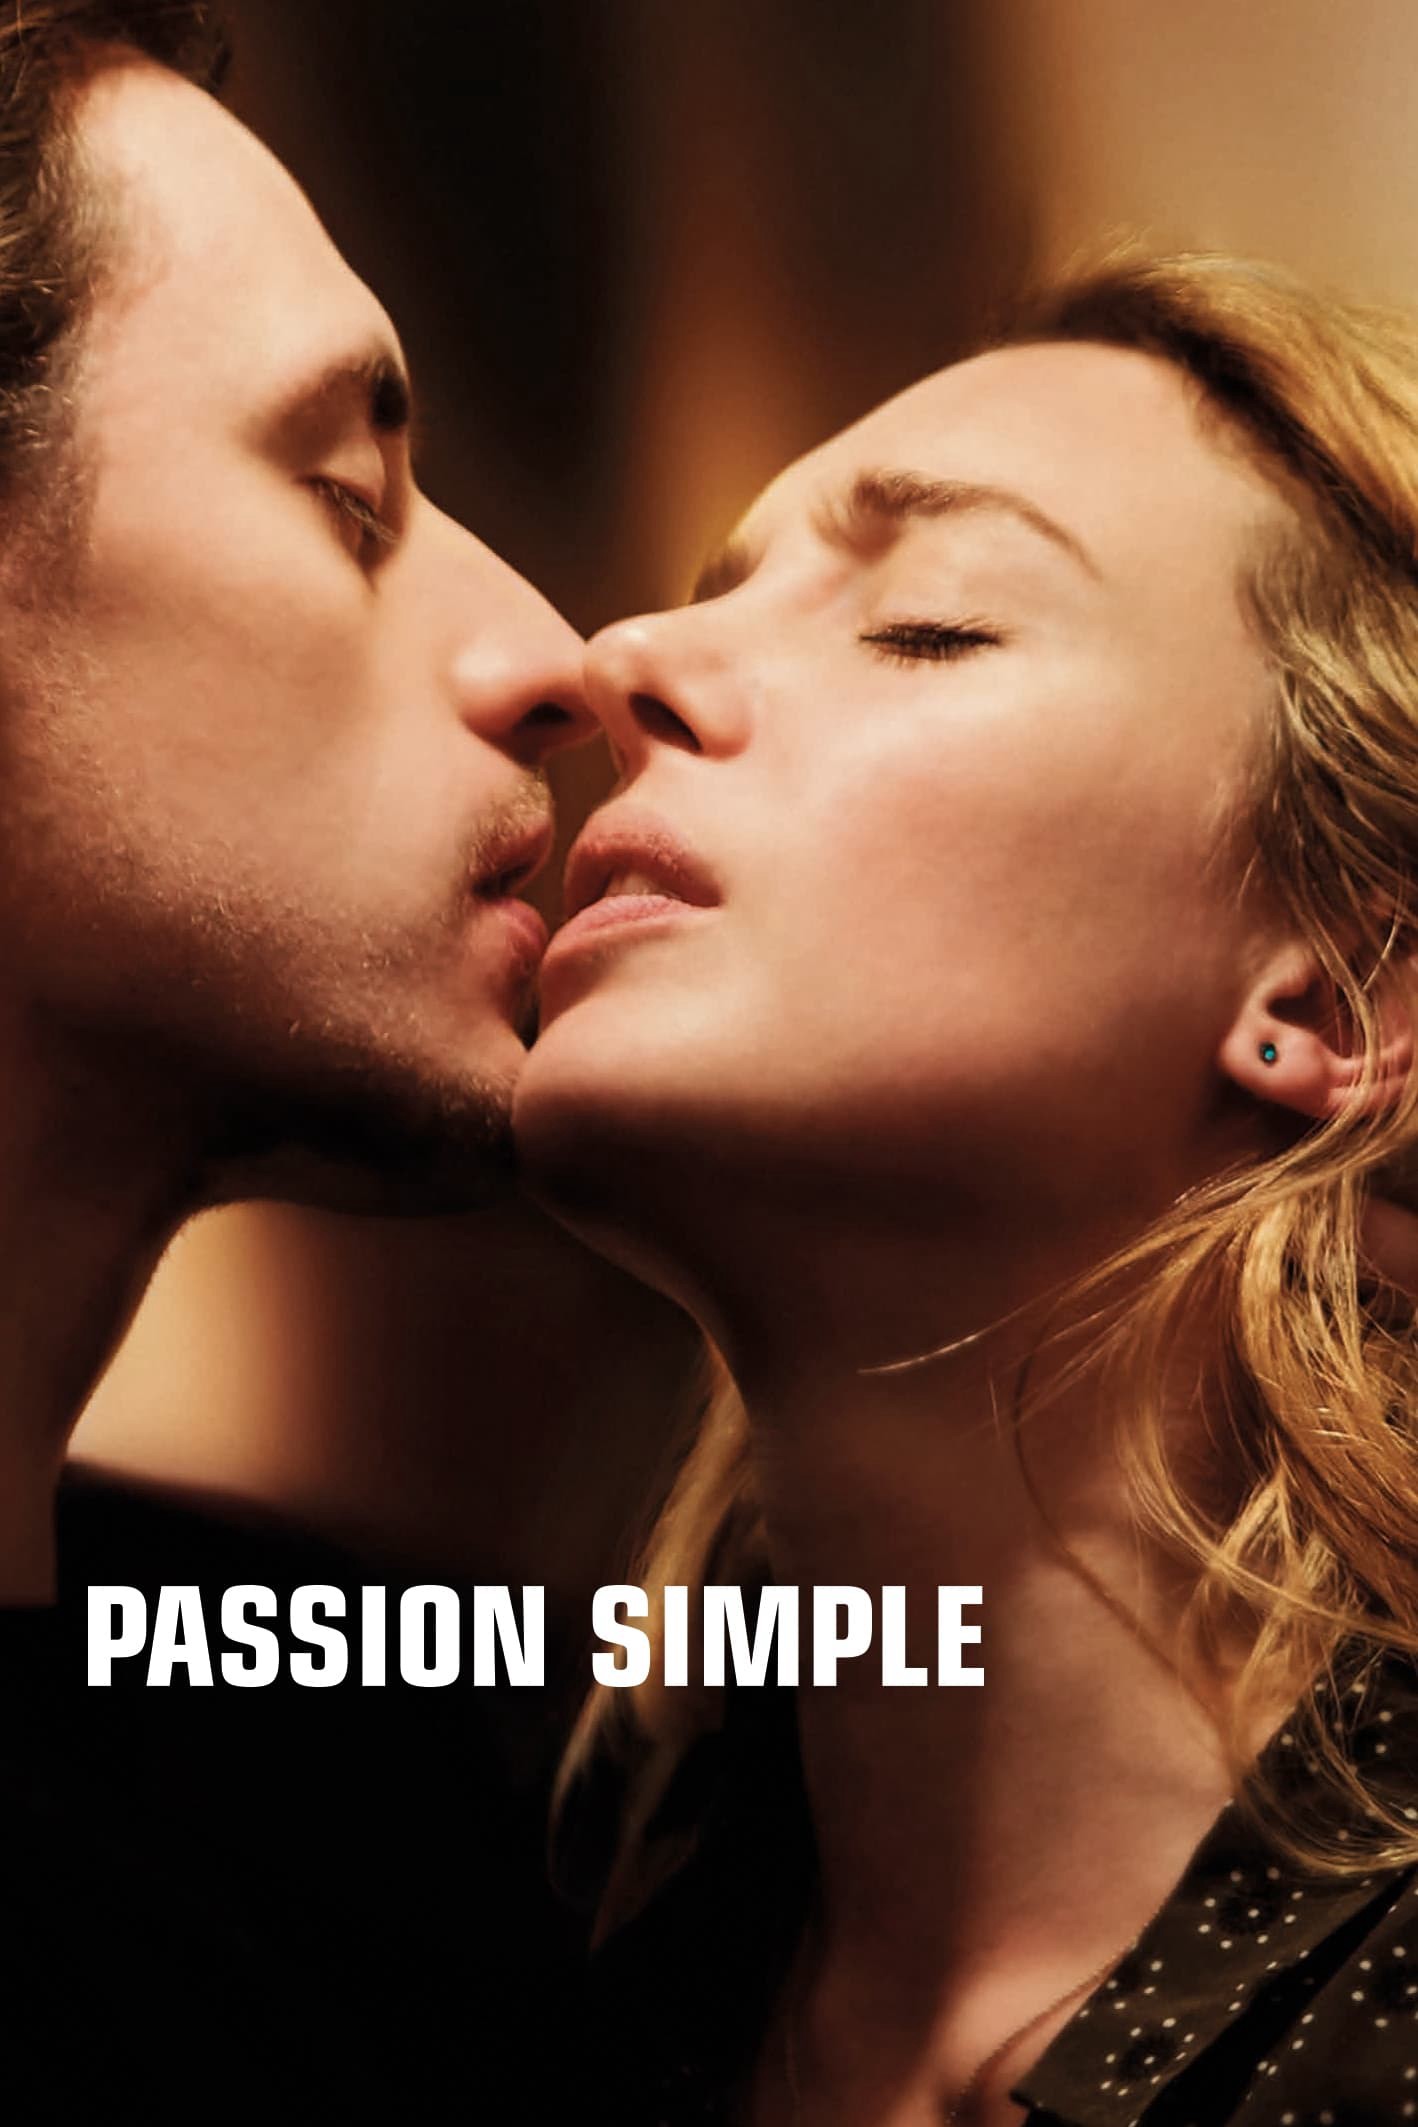 Passion simple | Simple Passion (2021)